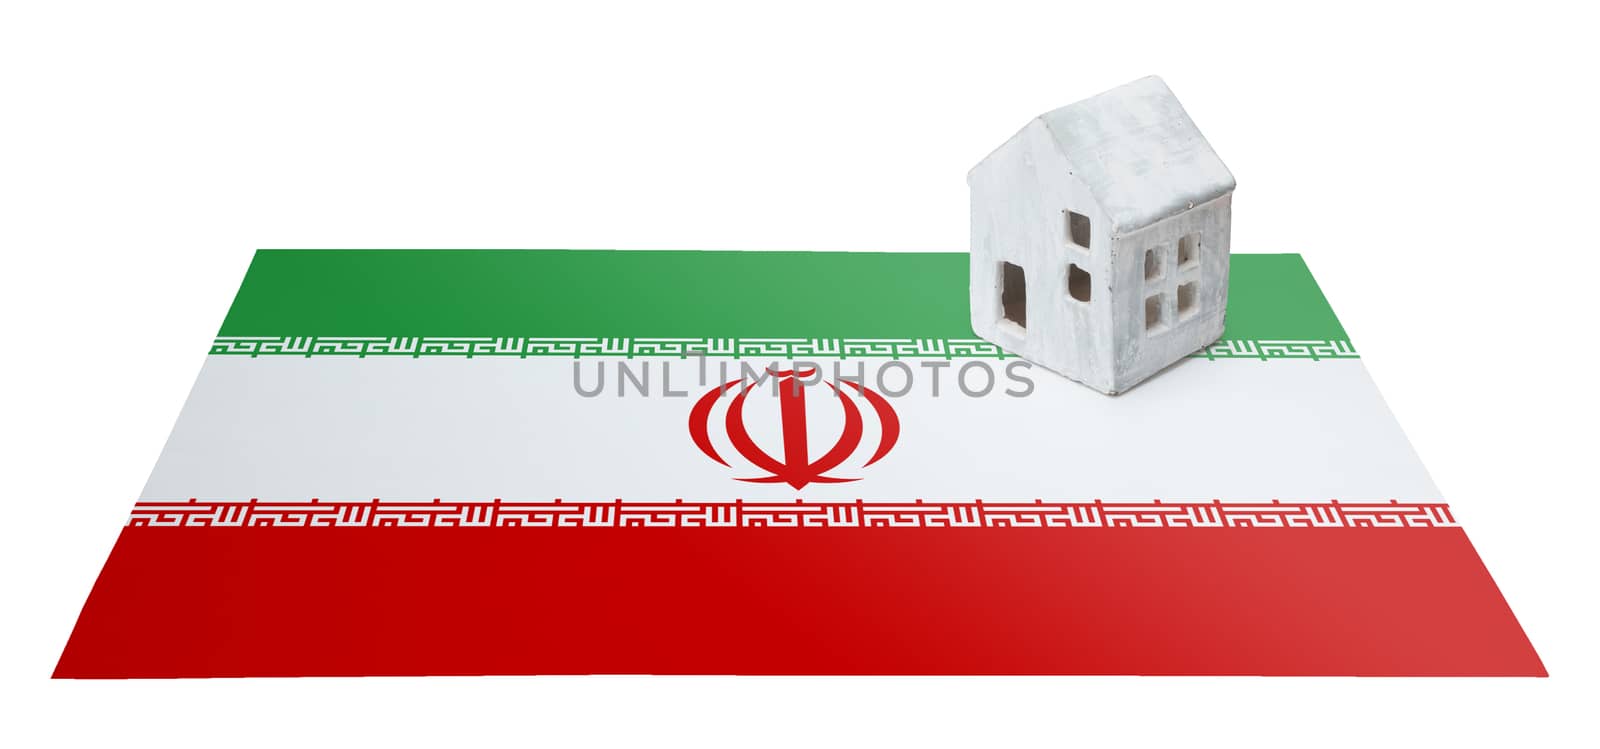 Small house on a flag - Living or migrating to Iran